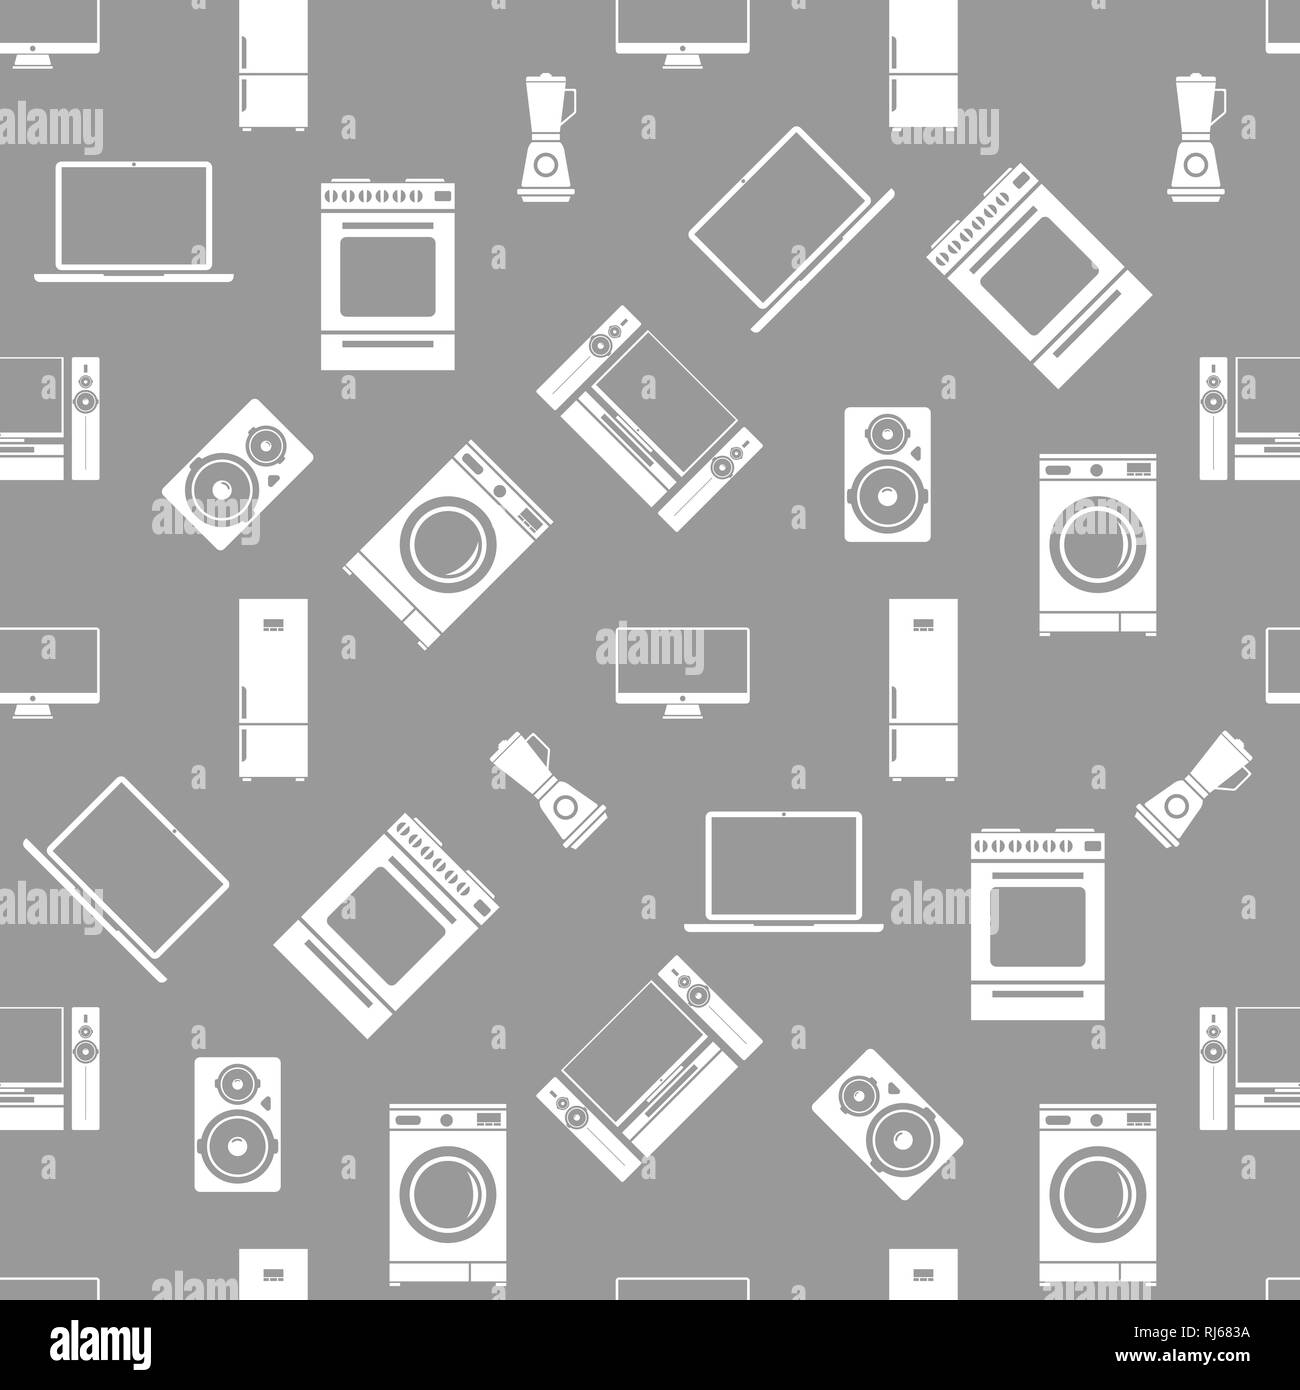 Household electrical appliances seamless pattern. Vector illustration. Stock Vector